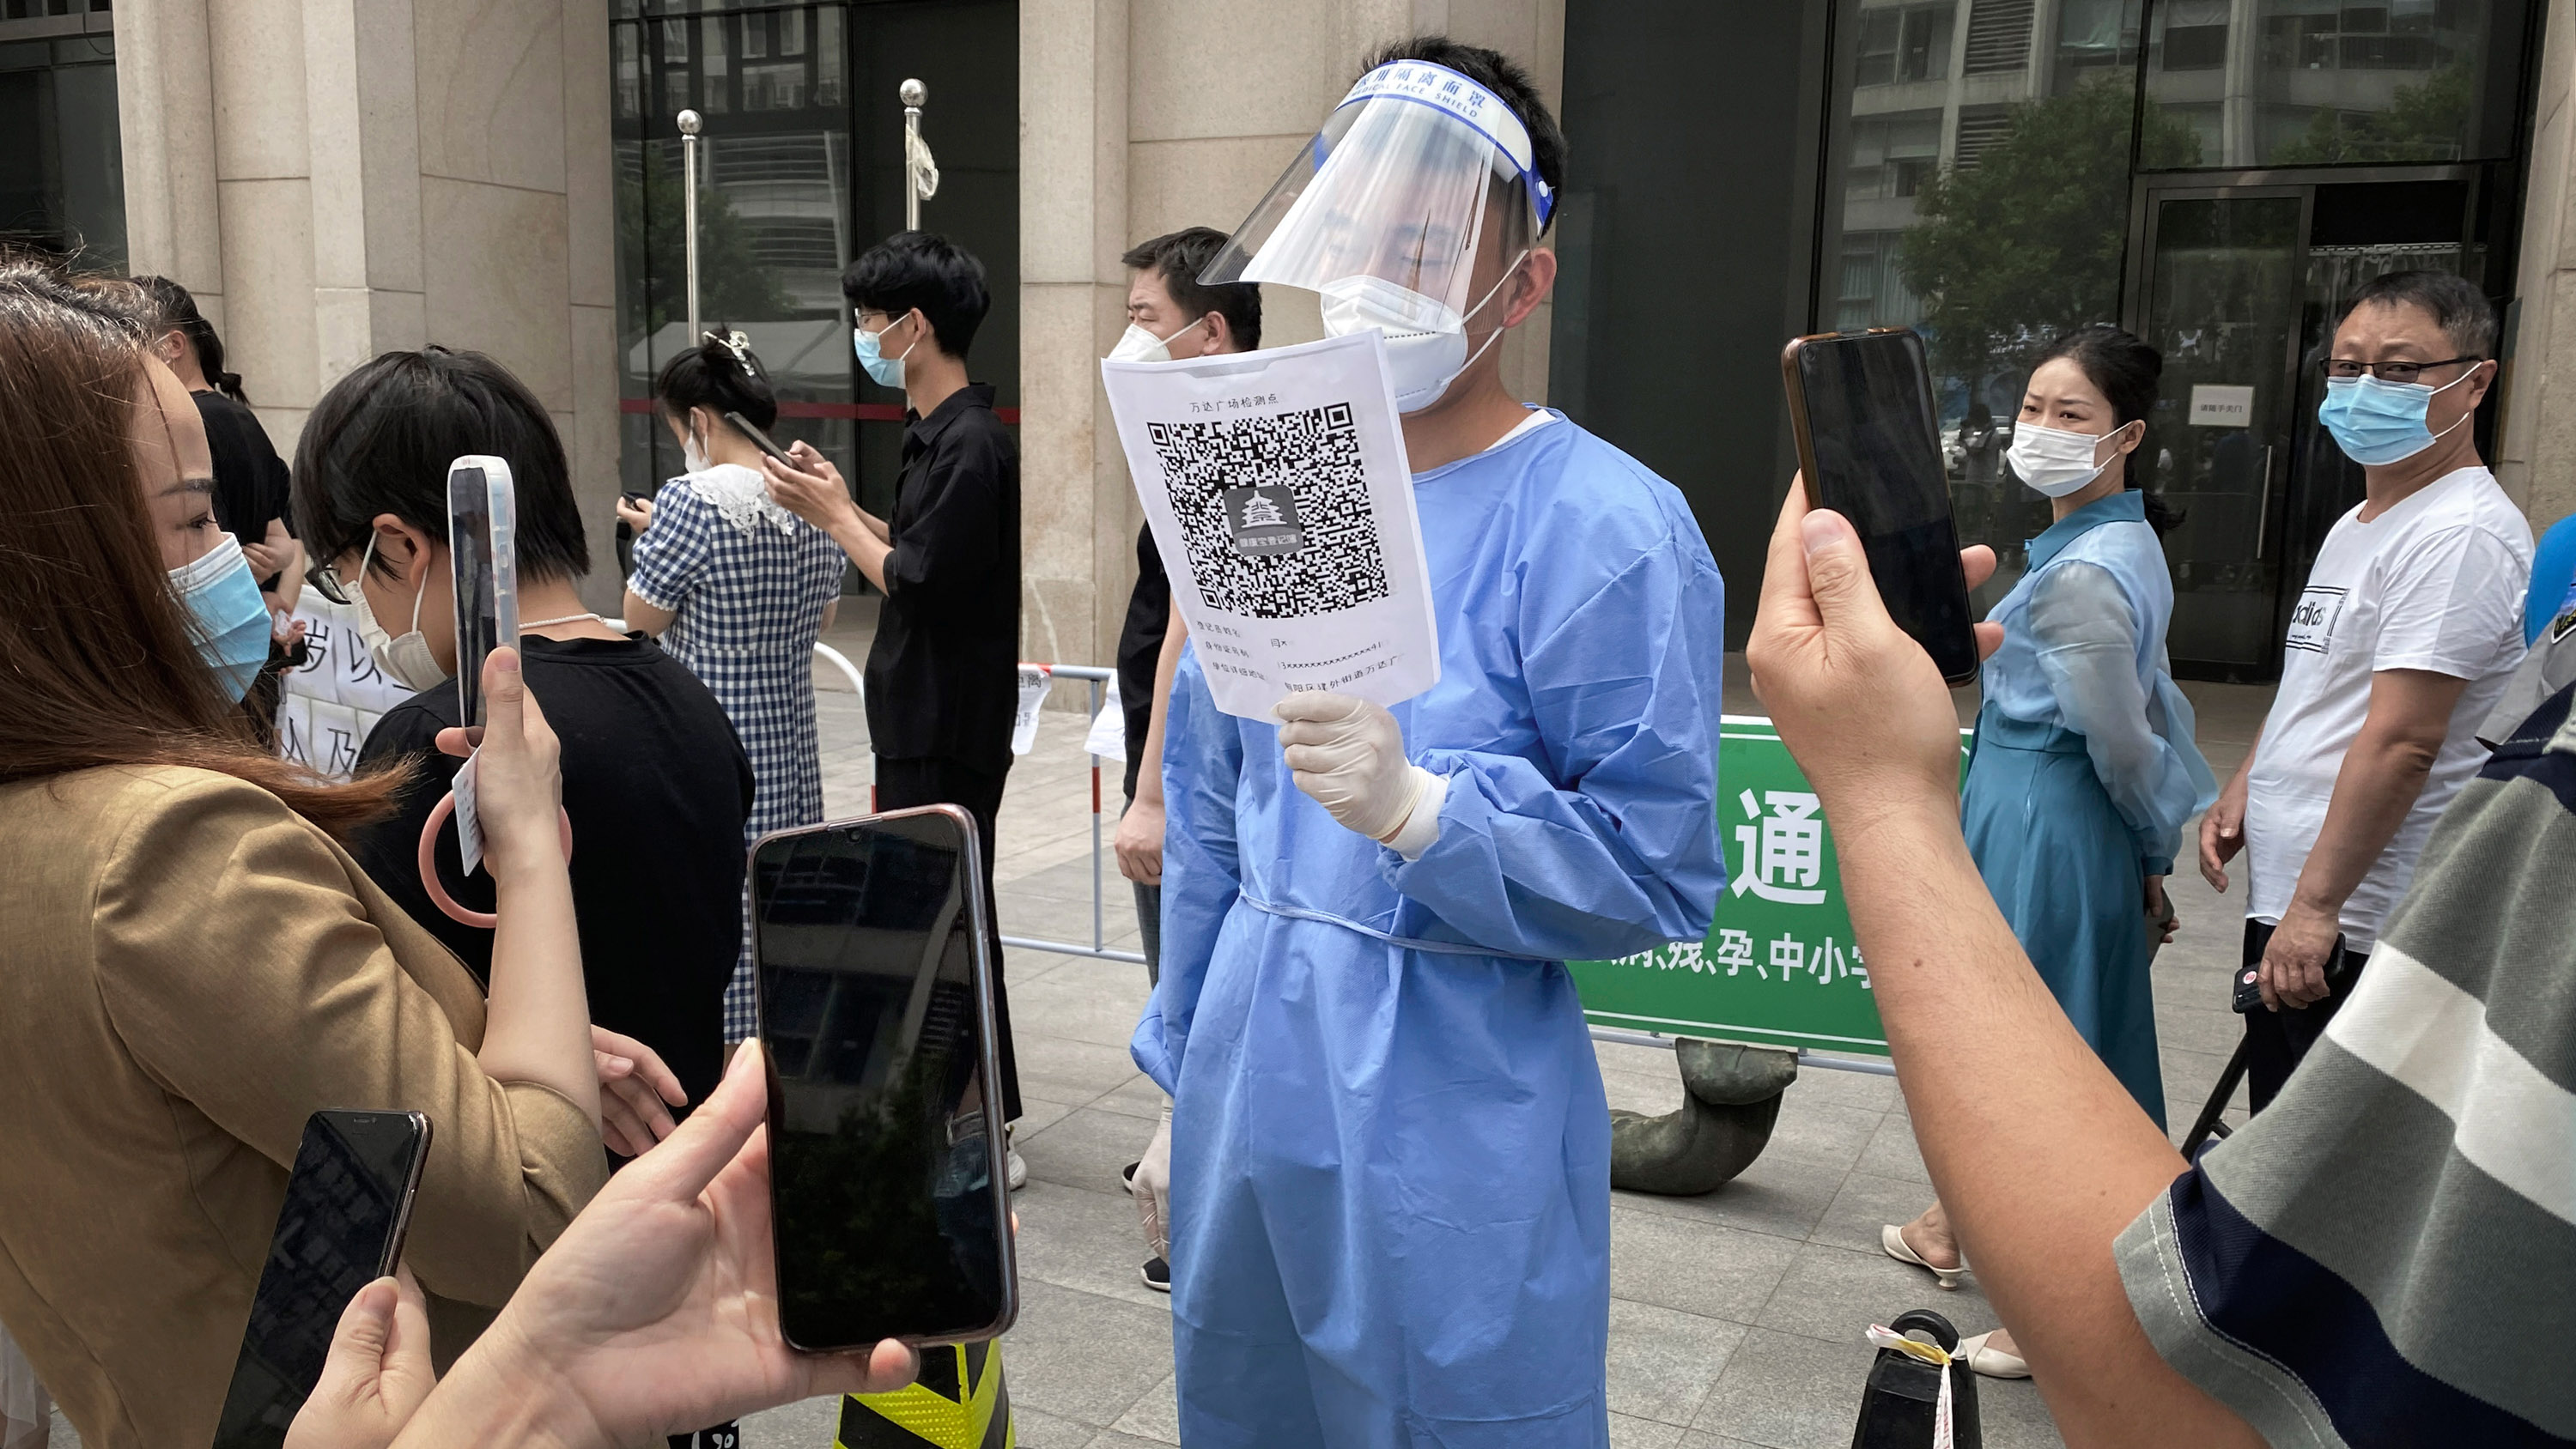 A health worker holds a Beijing Health Code for people to scan as they line up for a covid test